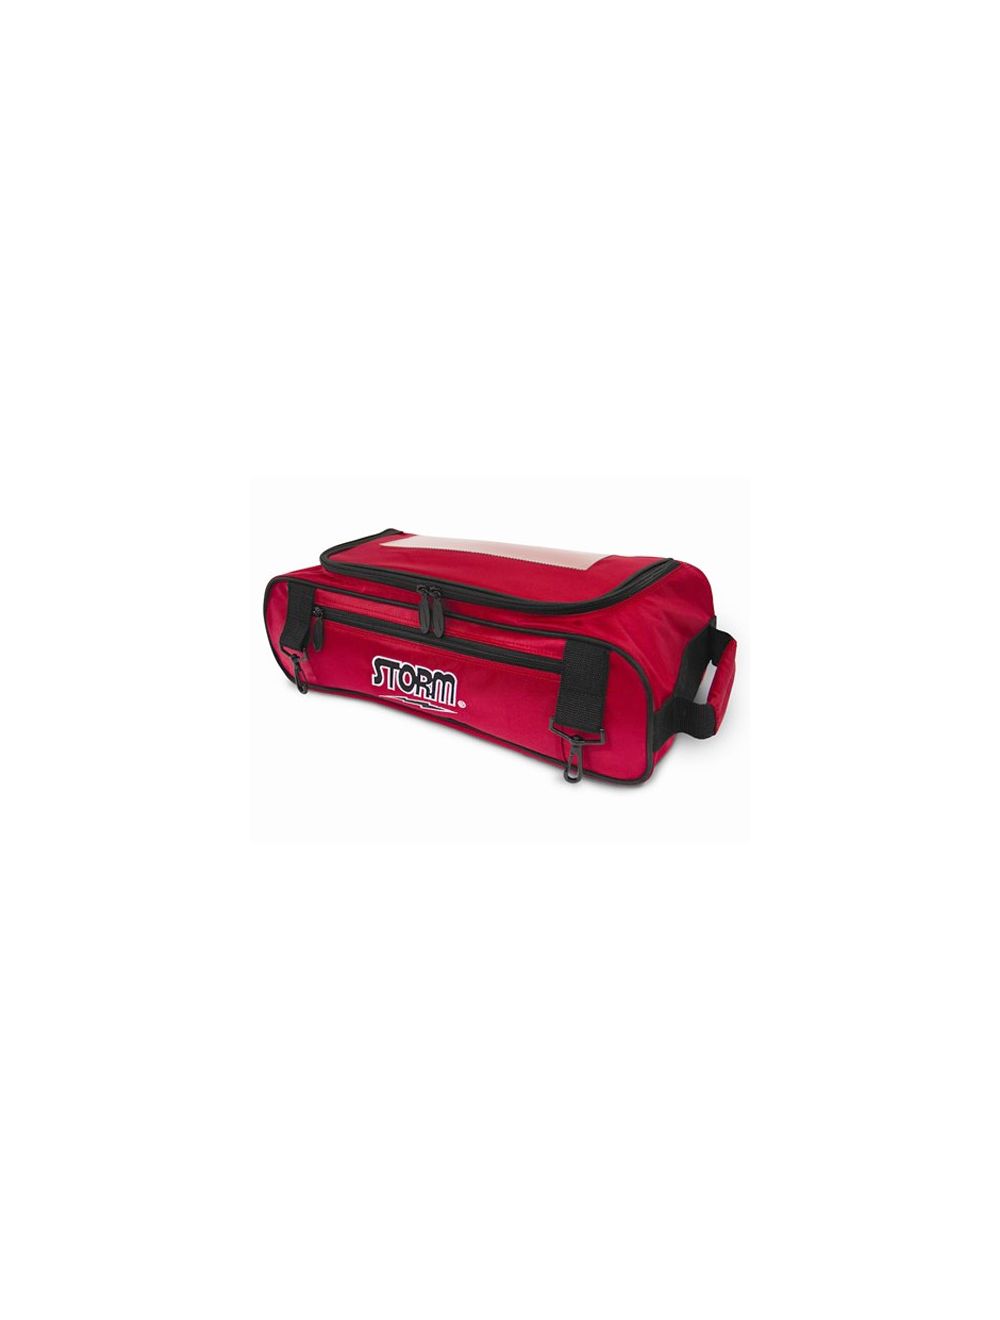 Storm Shoe Bag Red + Free Shipping